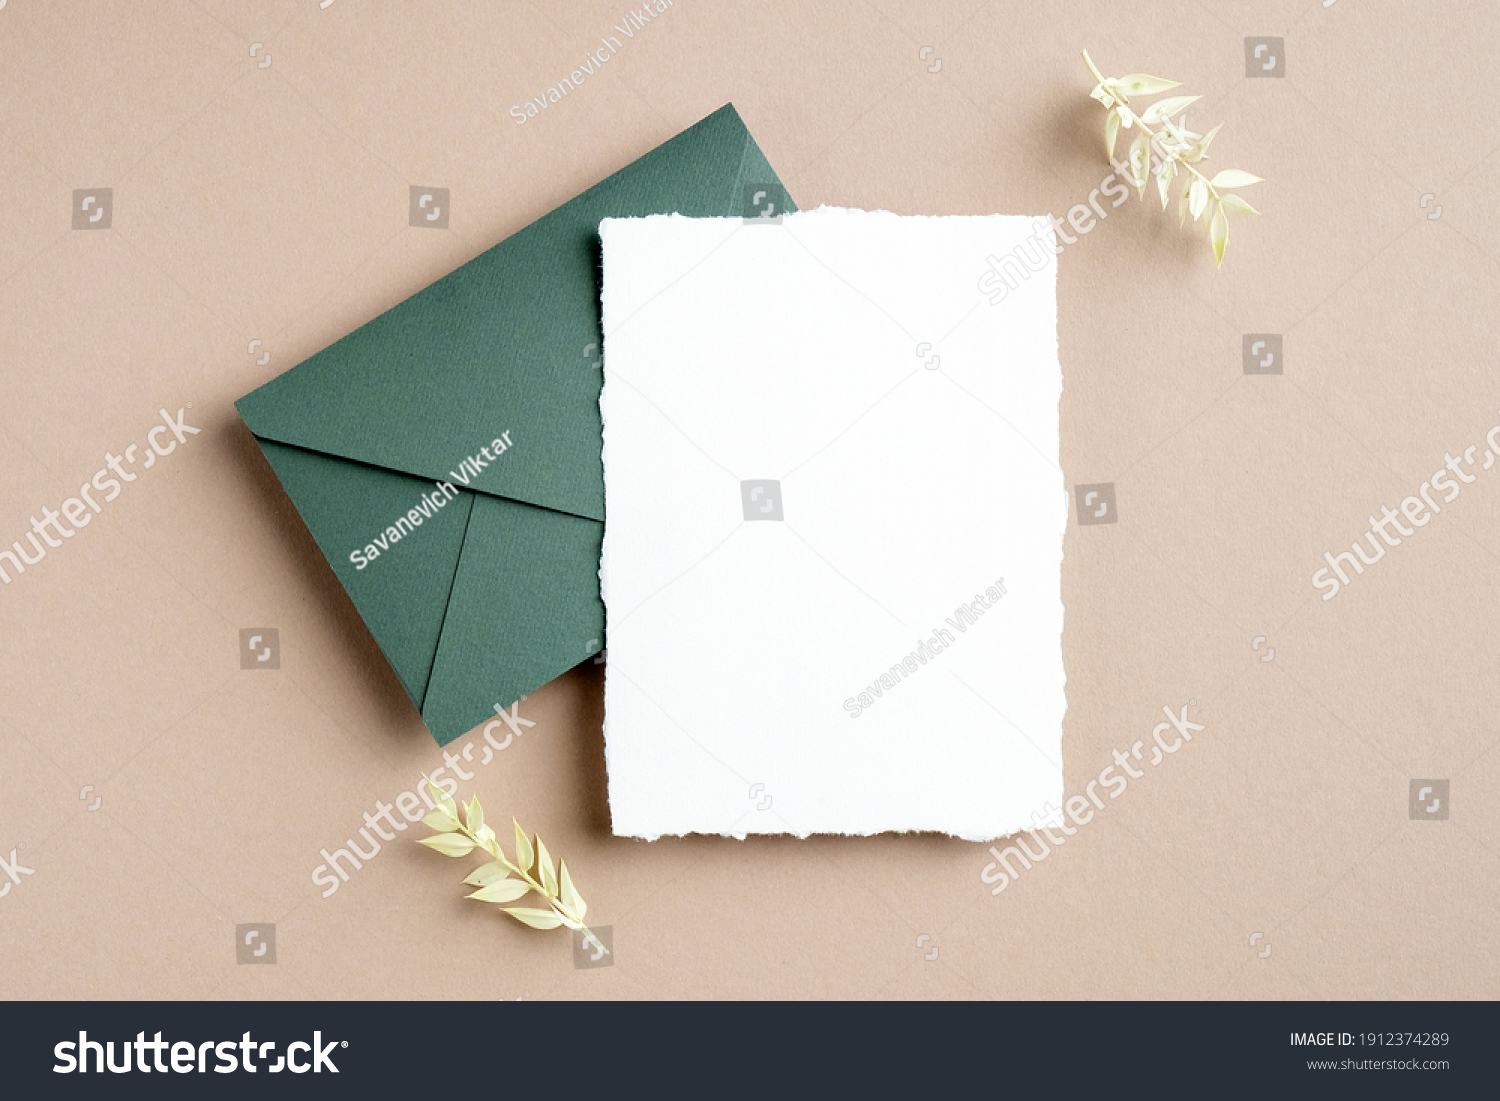 Rustic wedding invitation card mockup, green envelope and dried flowers on pastel beige background. Flat lay, top view, copy space. #1912374289